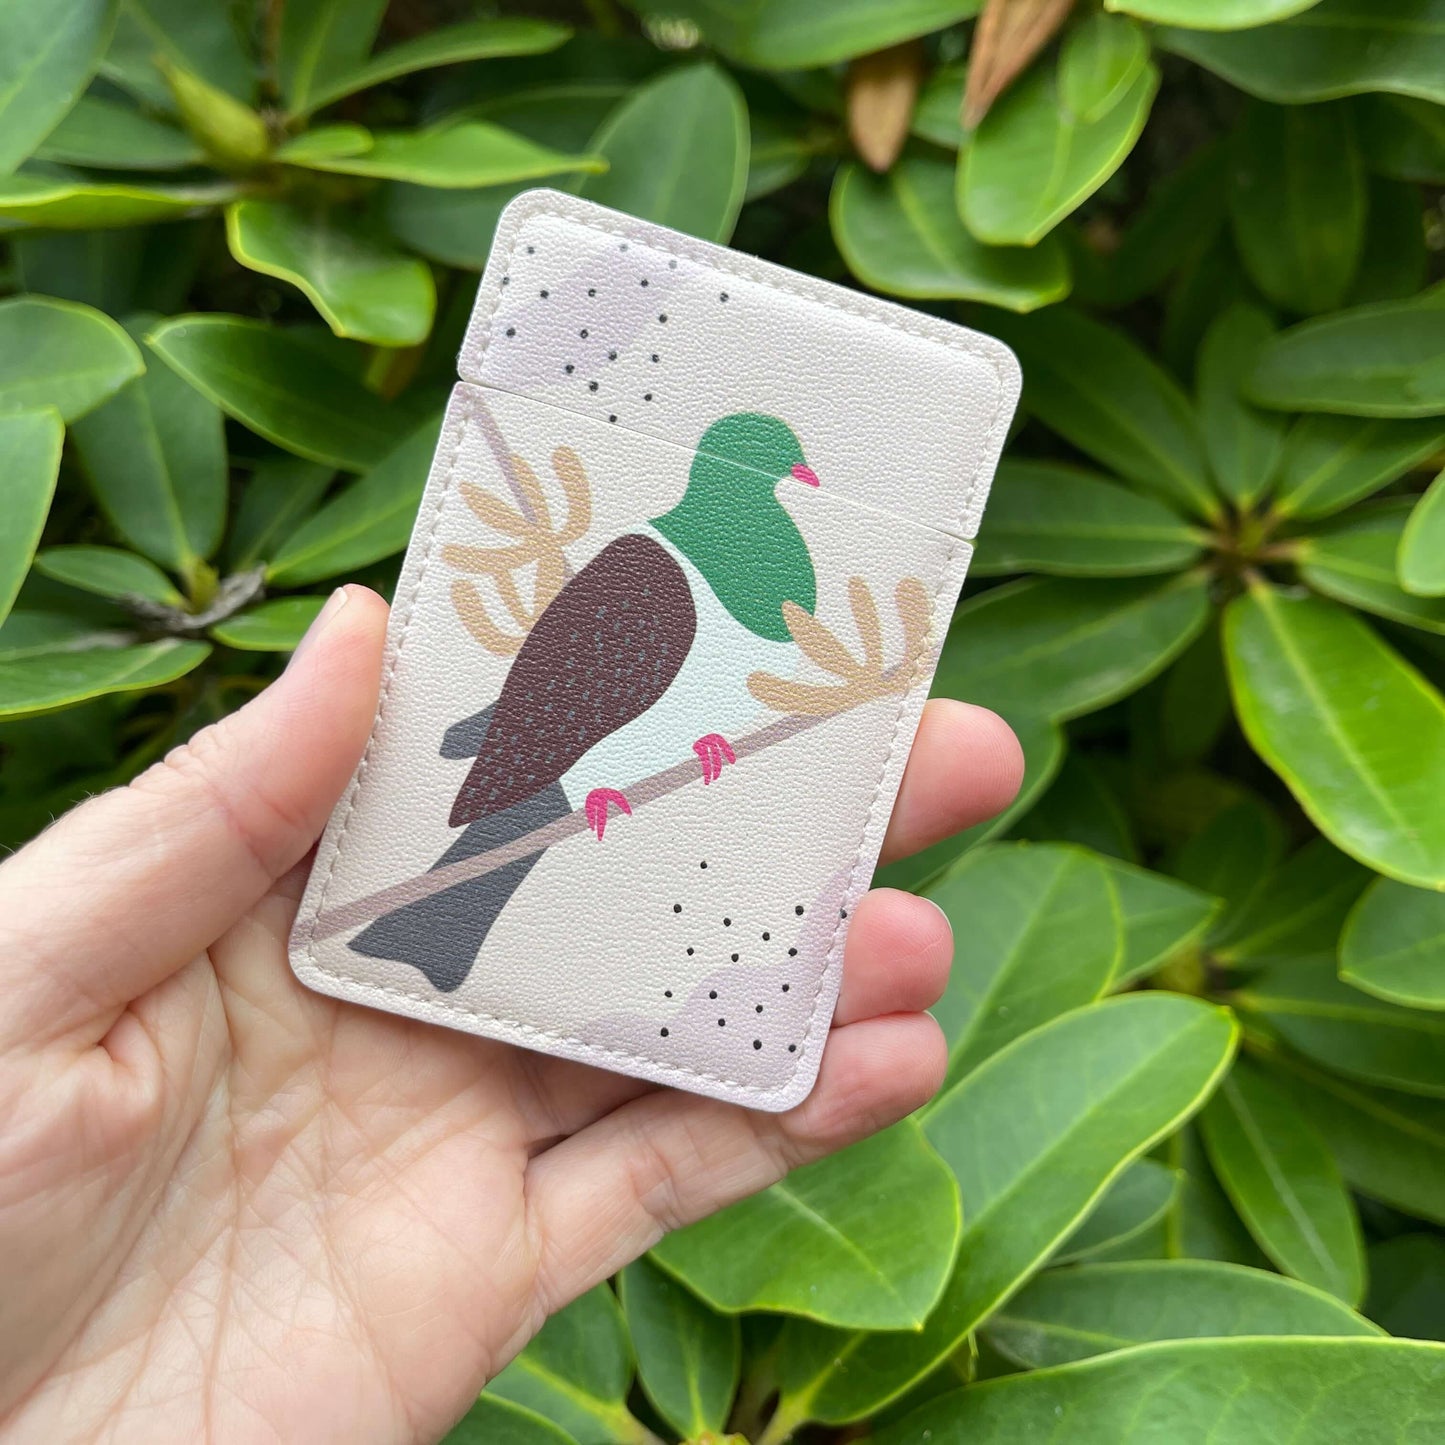 Small closed pocket mirror with a Kereru bird painted on it.